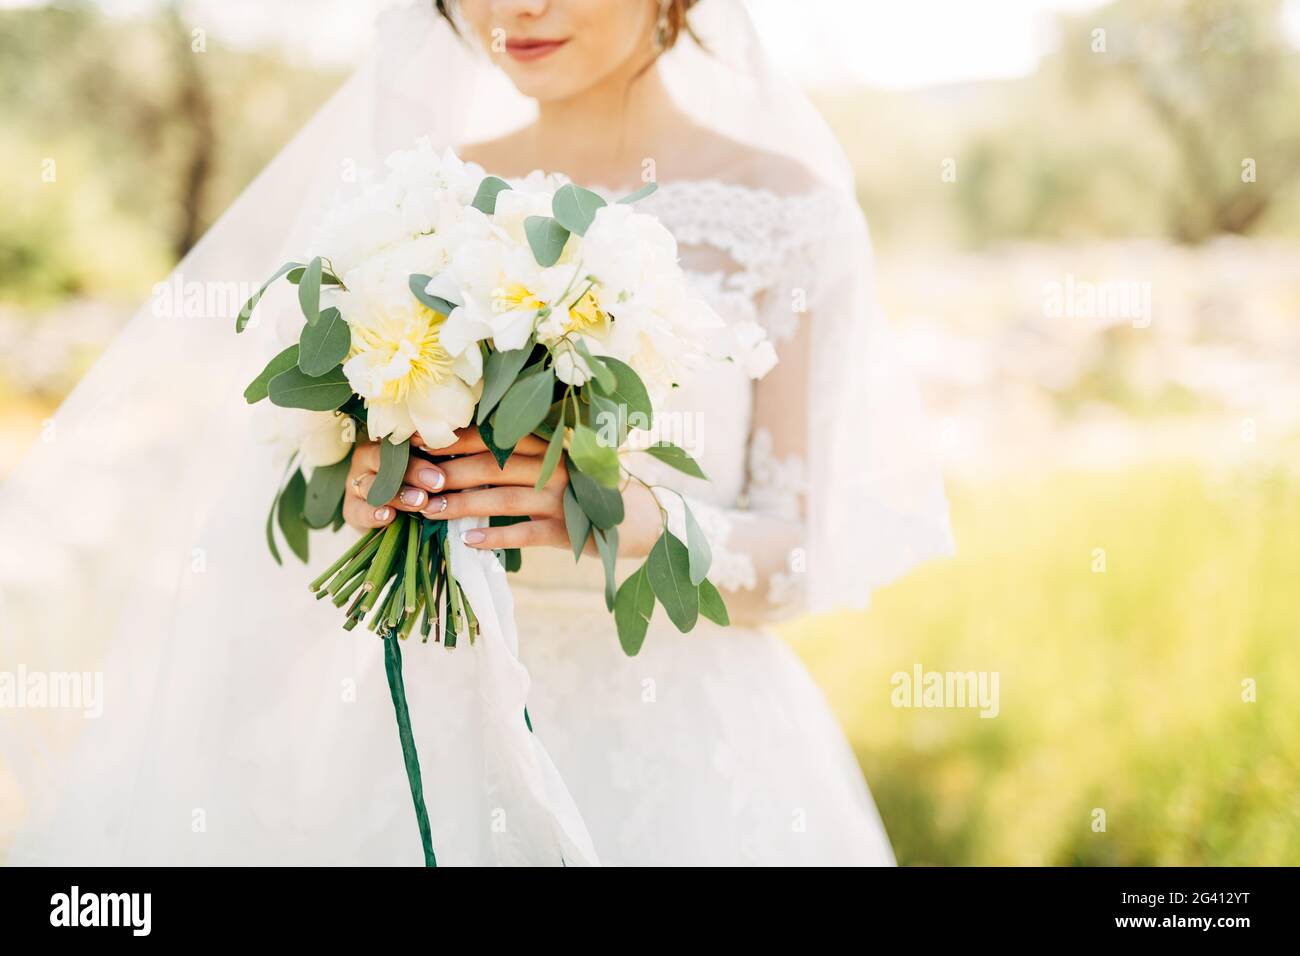 Beautiful bride in tender wedding dress holding bridal bouquet in her hands Stock Photo